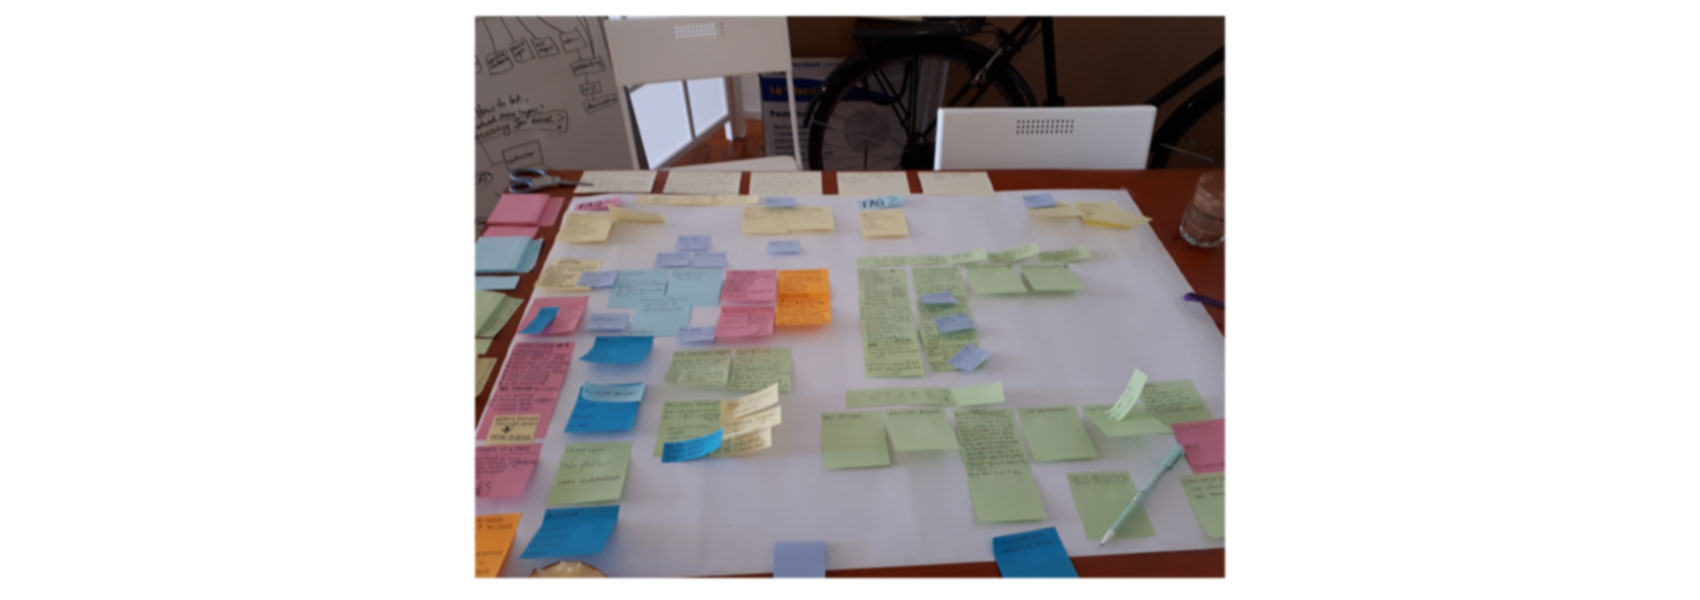 Image of a sticky note workshop to determine strategy